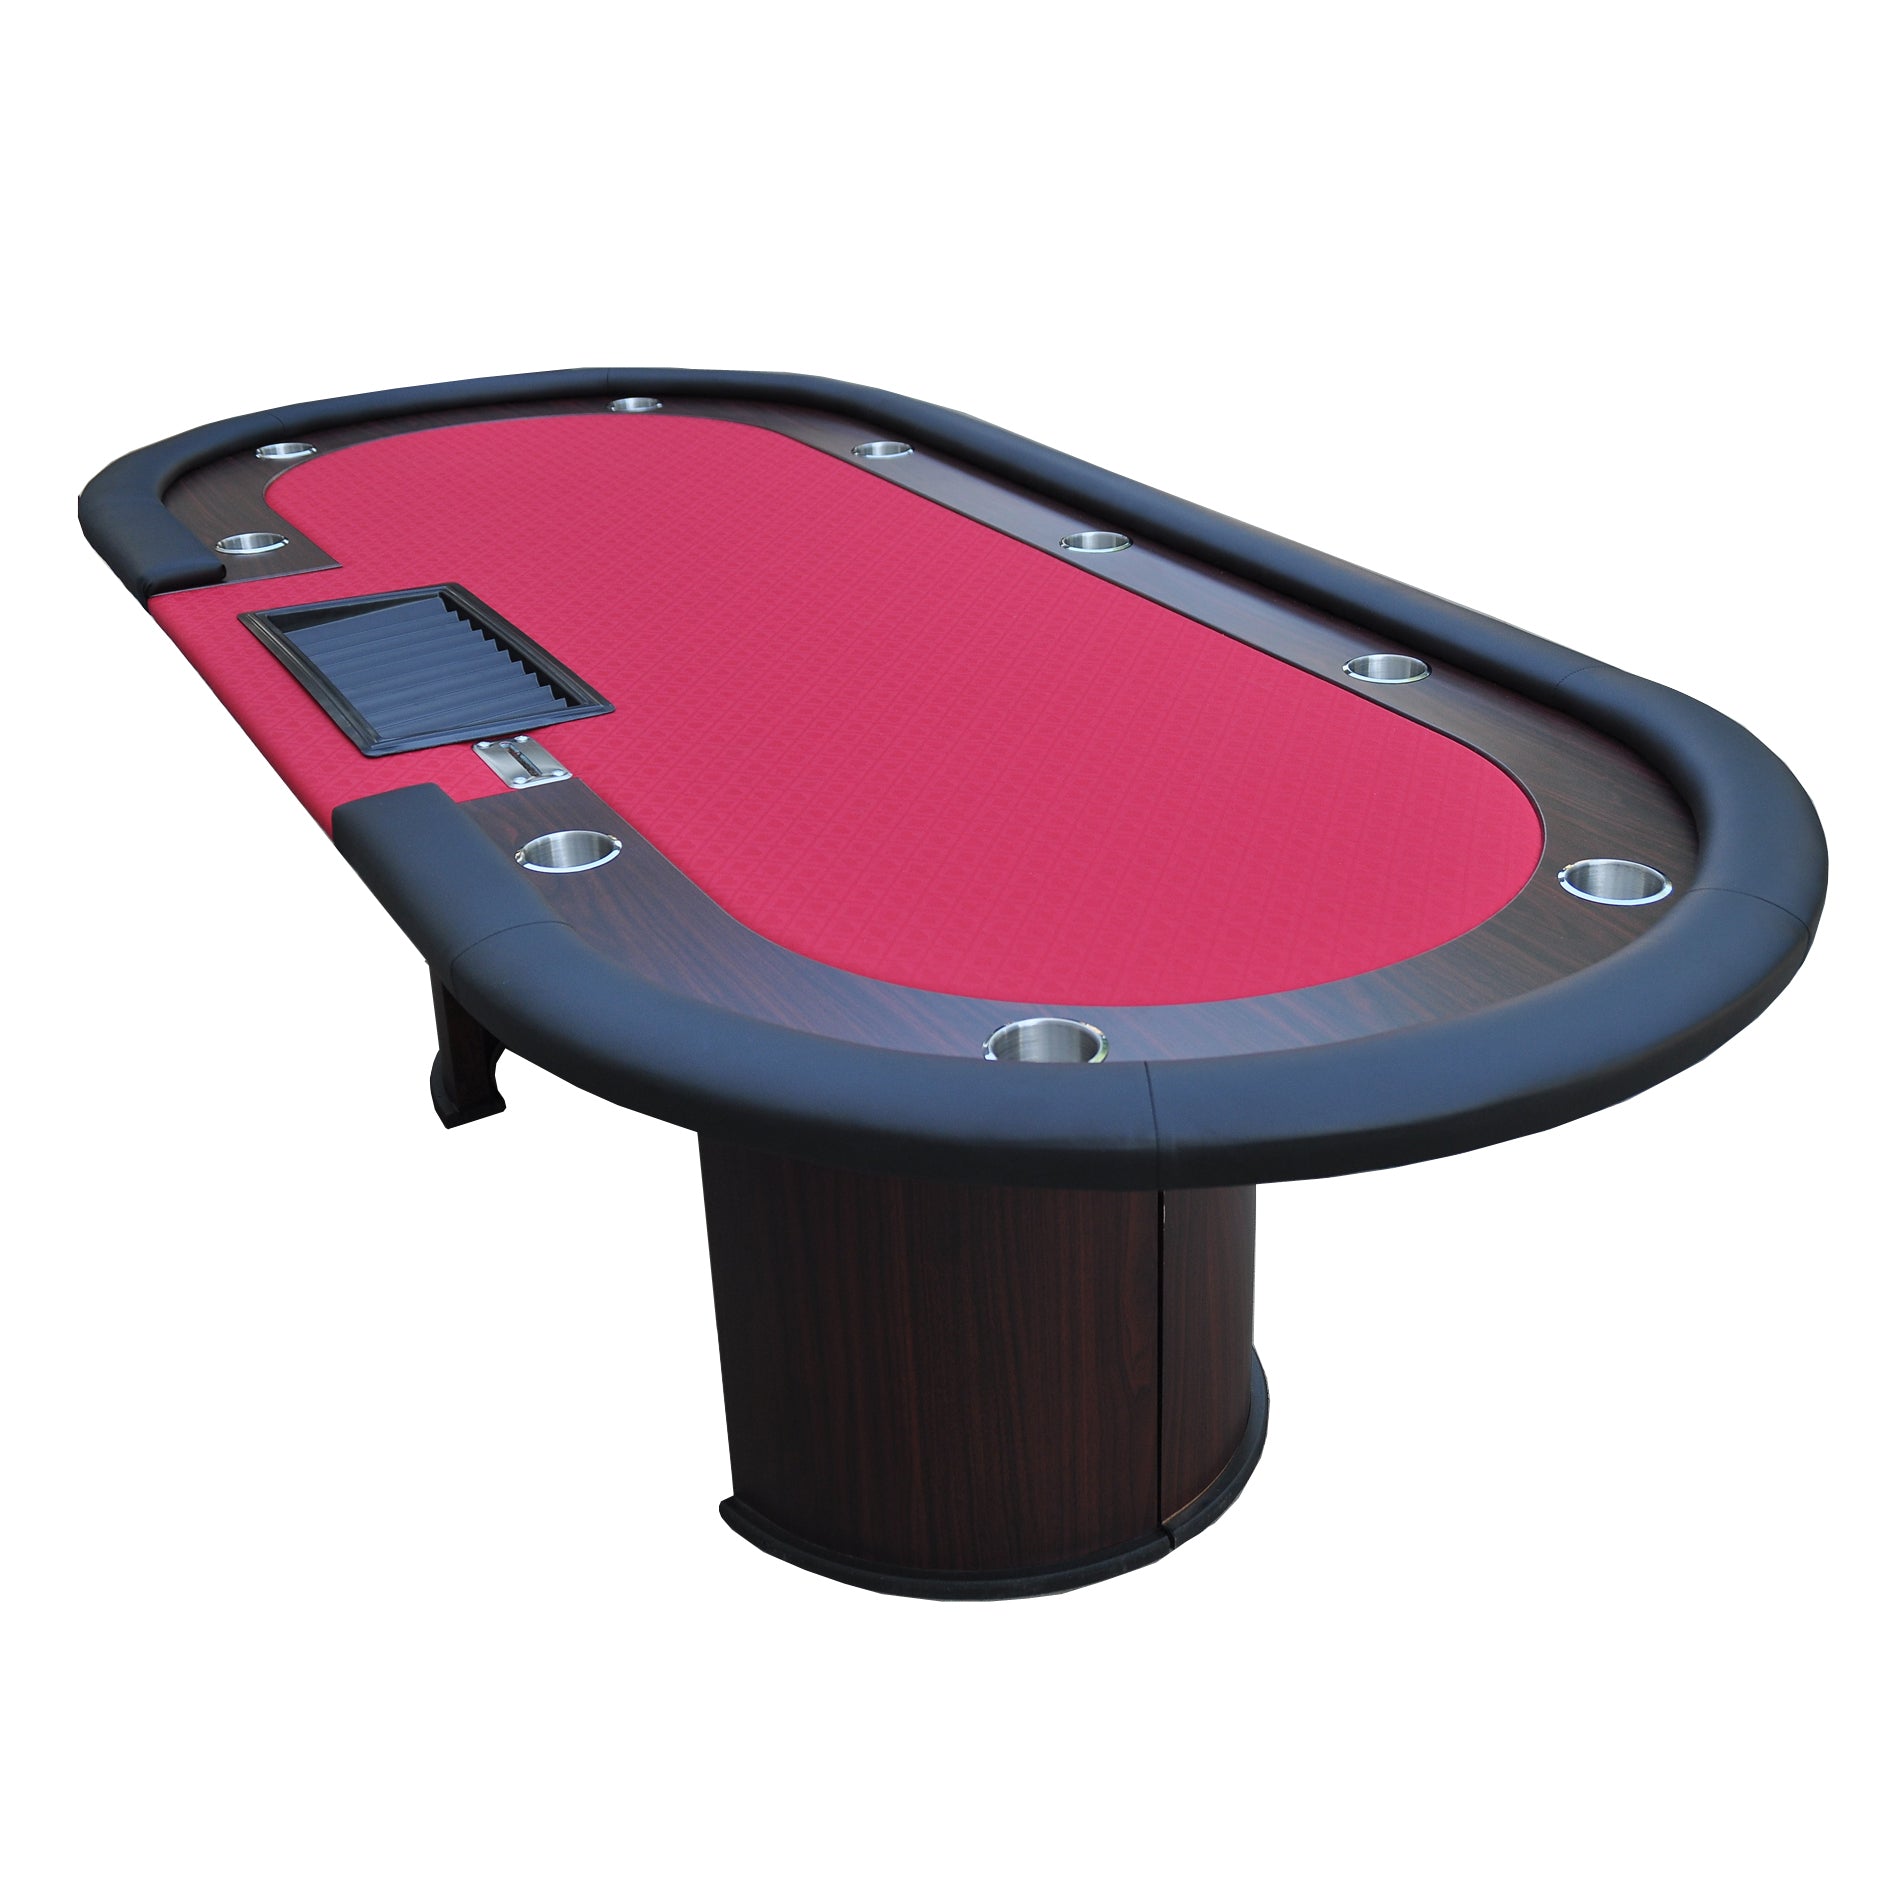 96" 9 Players Oval Red Waterproof Surface red-wood